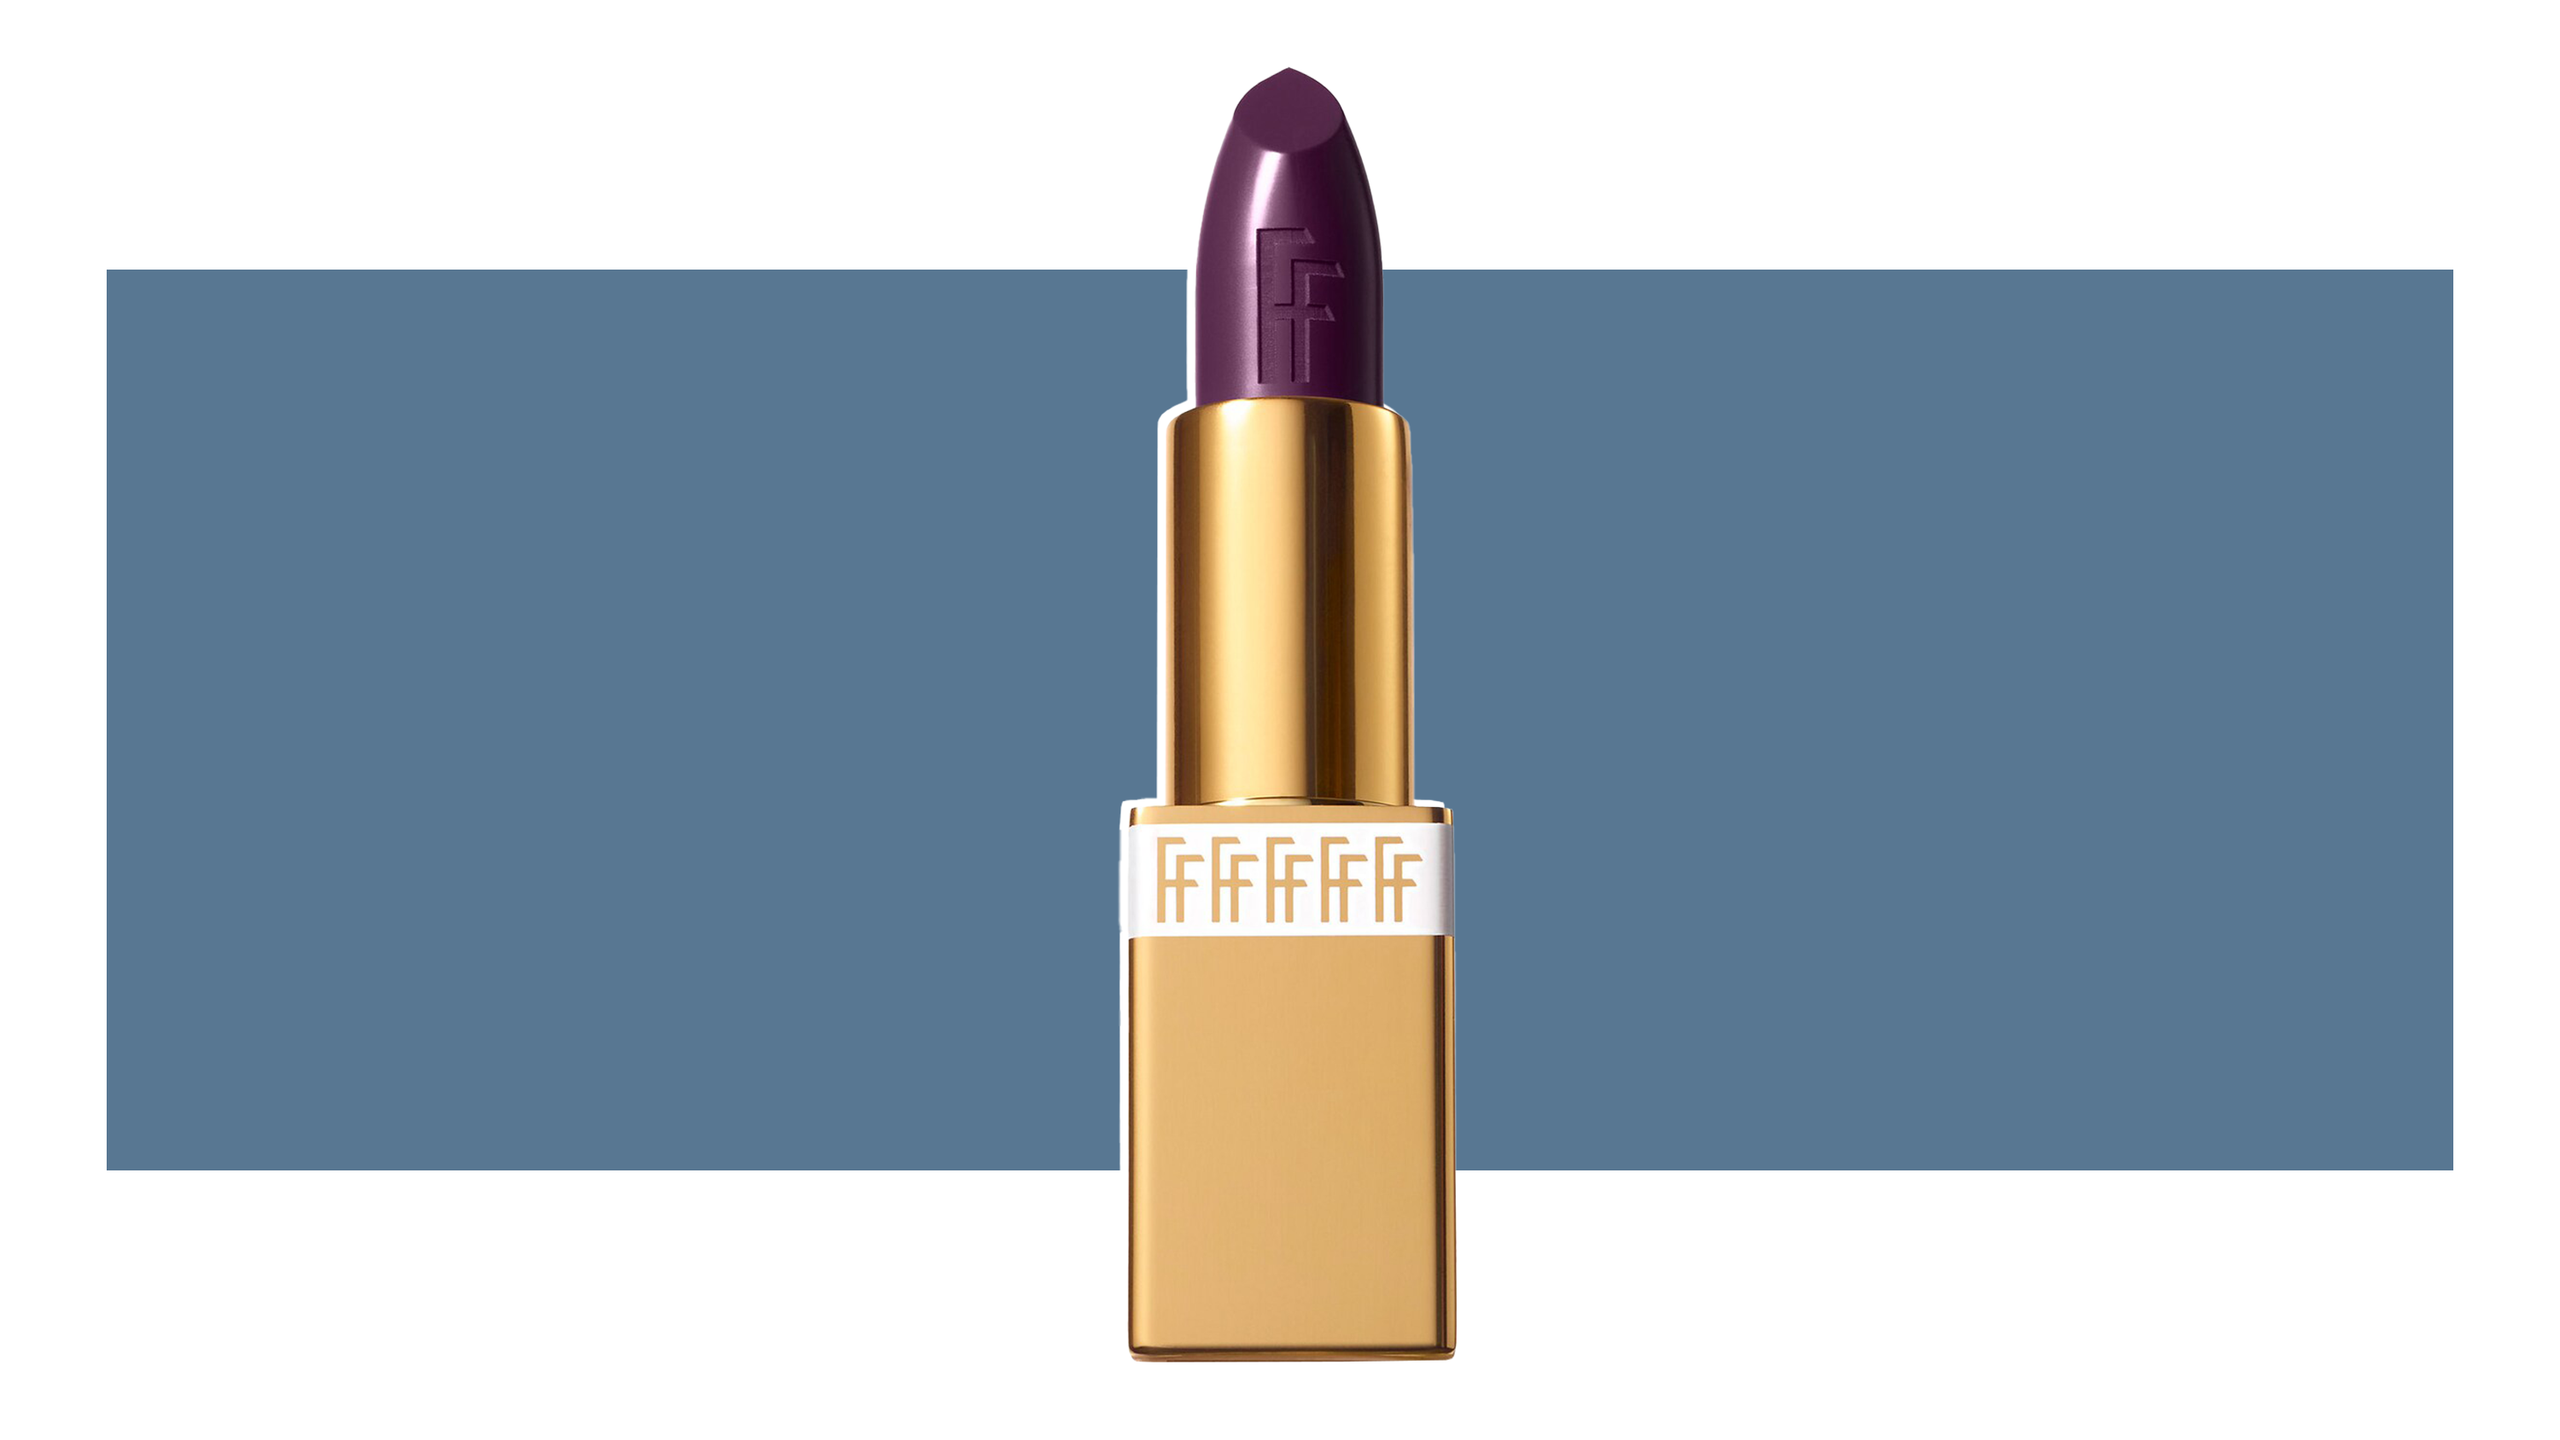 Go the non-traditional red route with the Fashion Fair Iconic Lipstick.